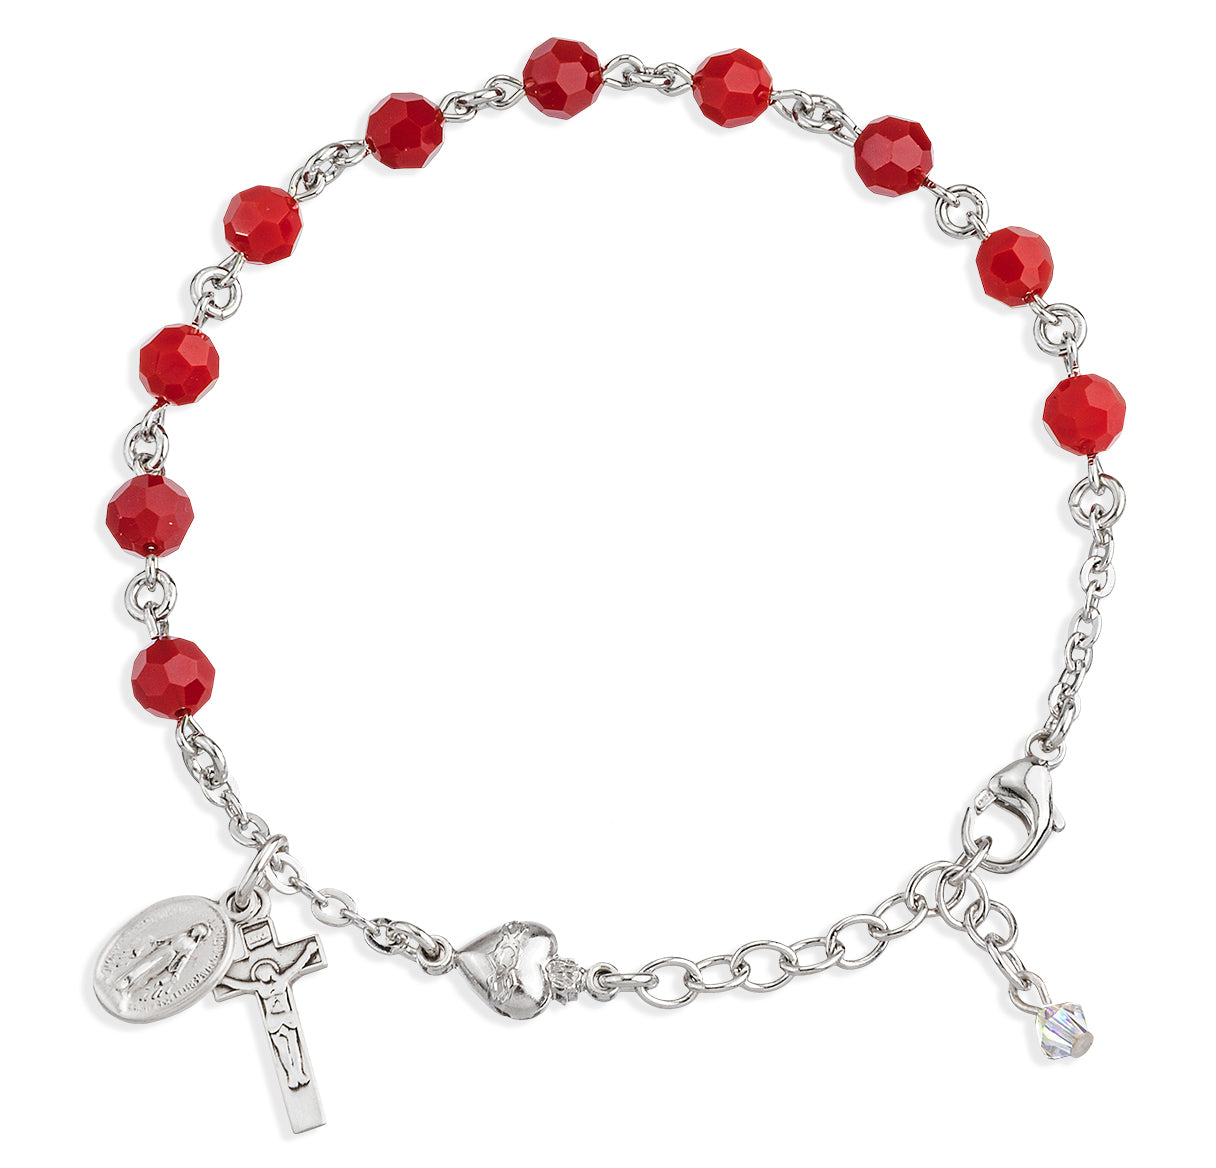 Sterling Silver Rosary Bracelet Created with 6mm Coral Swarovski Crystal Round Beads by HMH